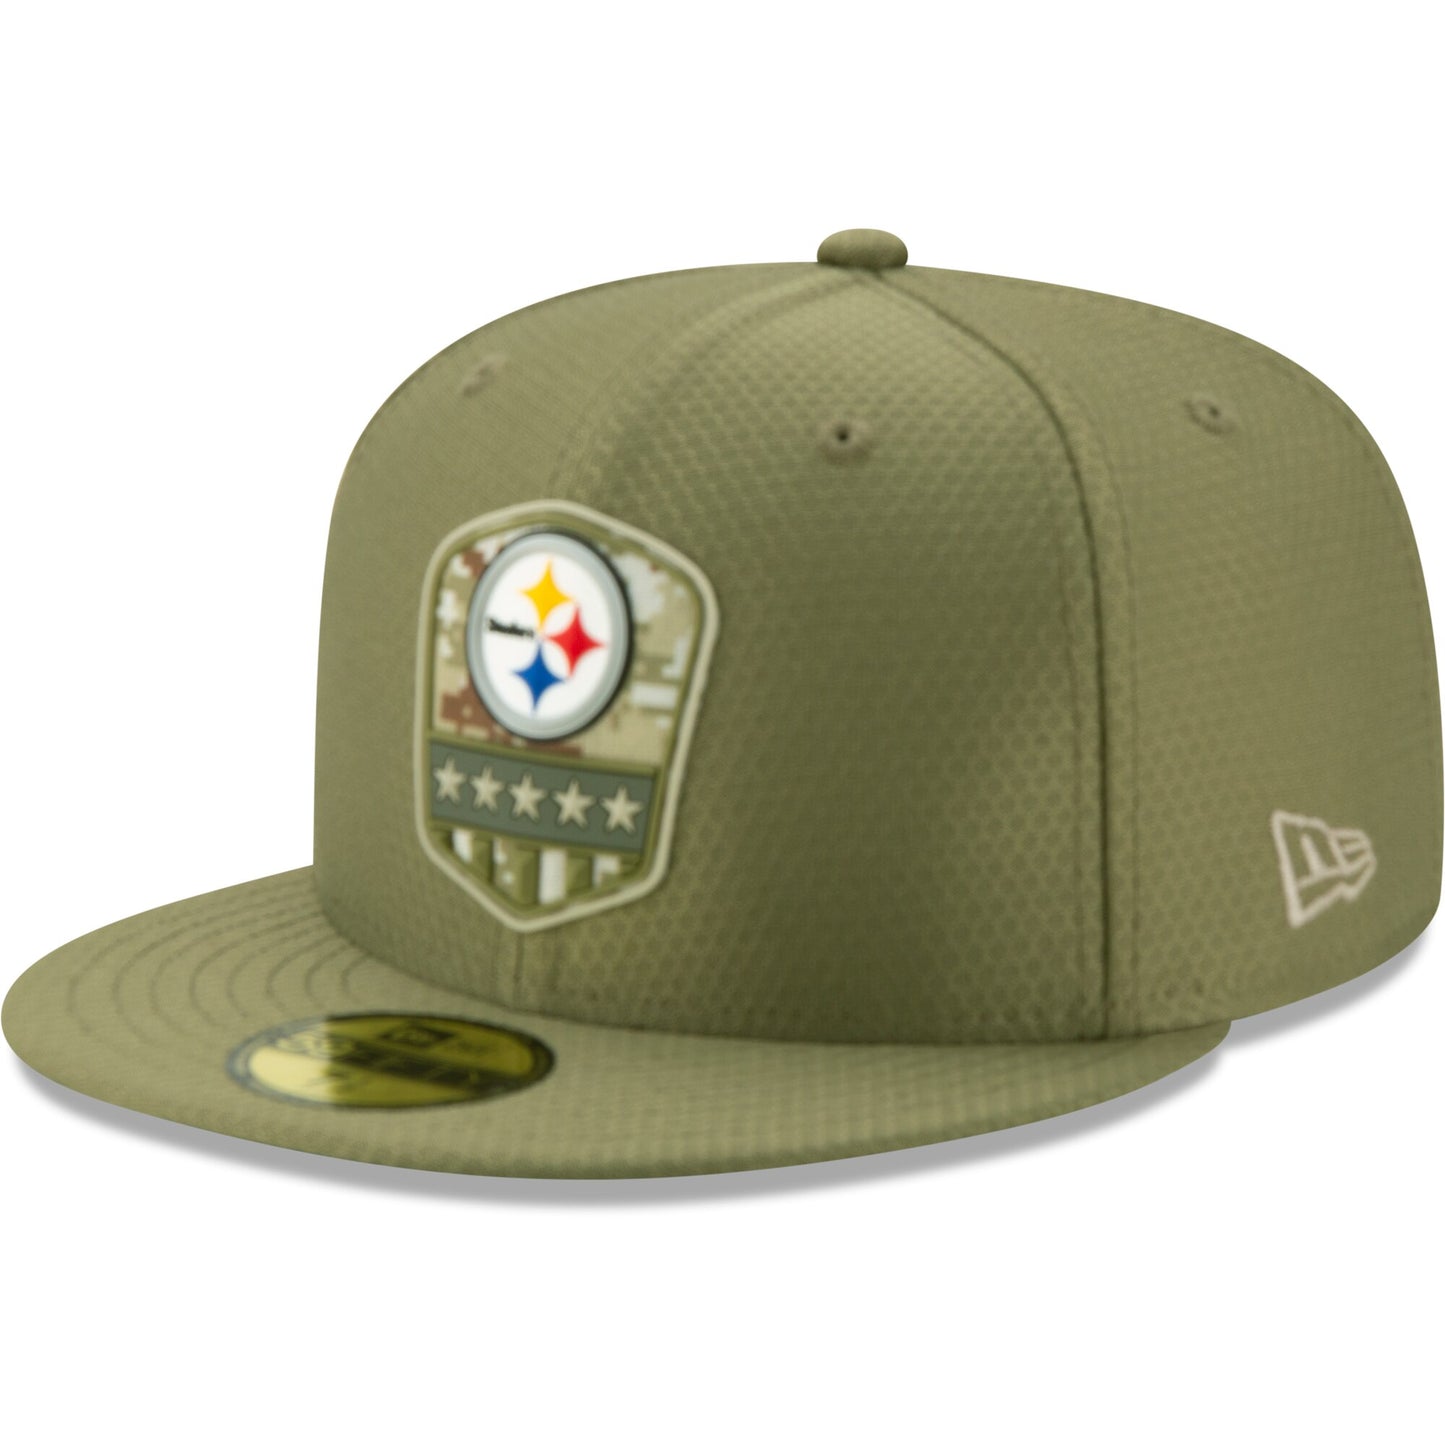 Pitsburgh Steelers New Era Salute To Service 59FIFTY Fitted Hat – Olive